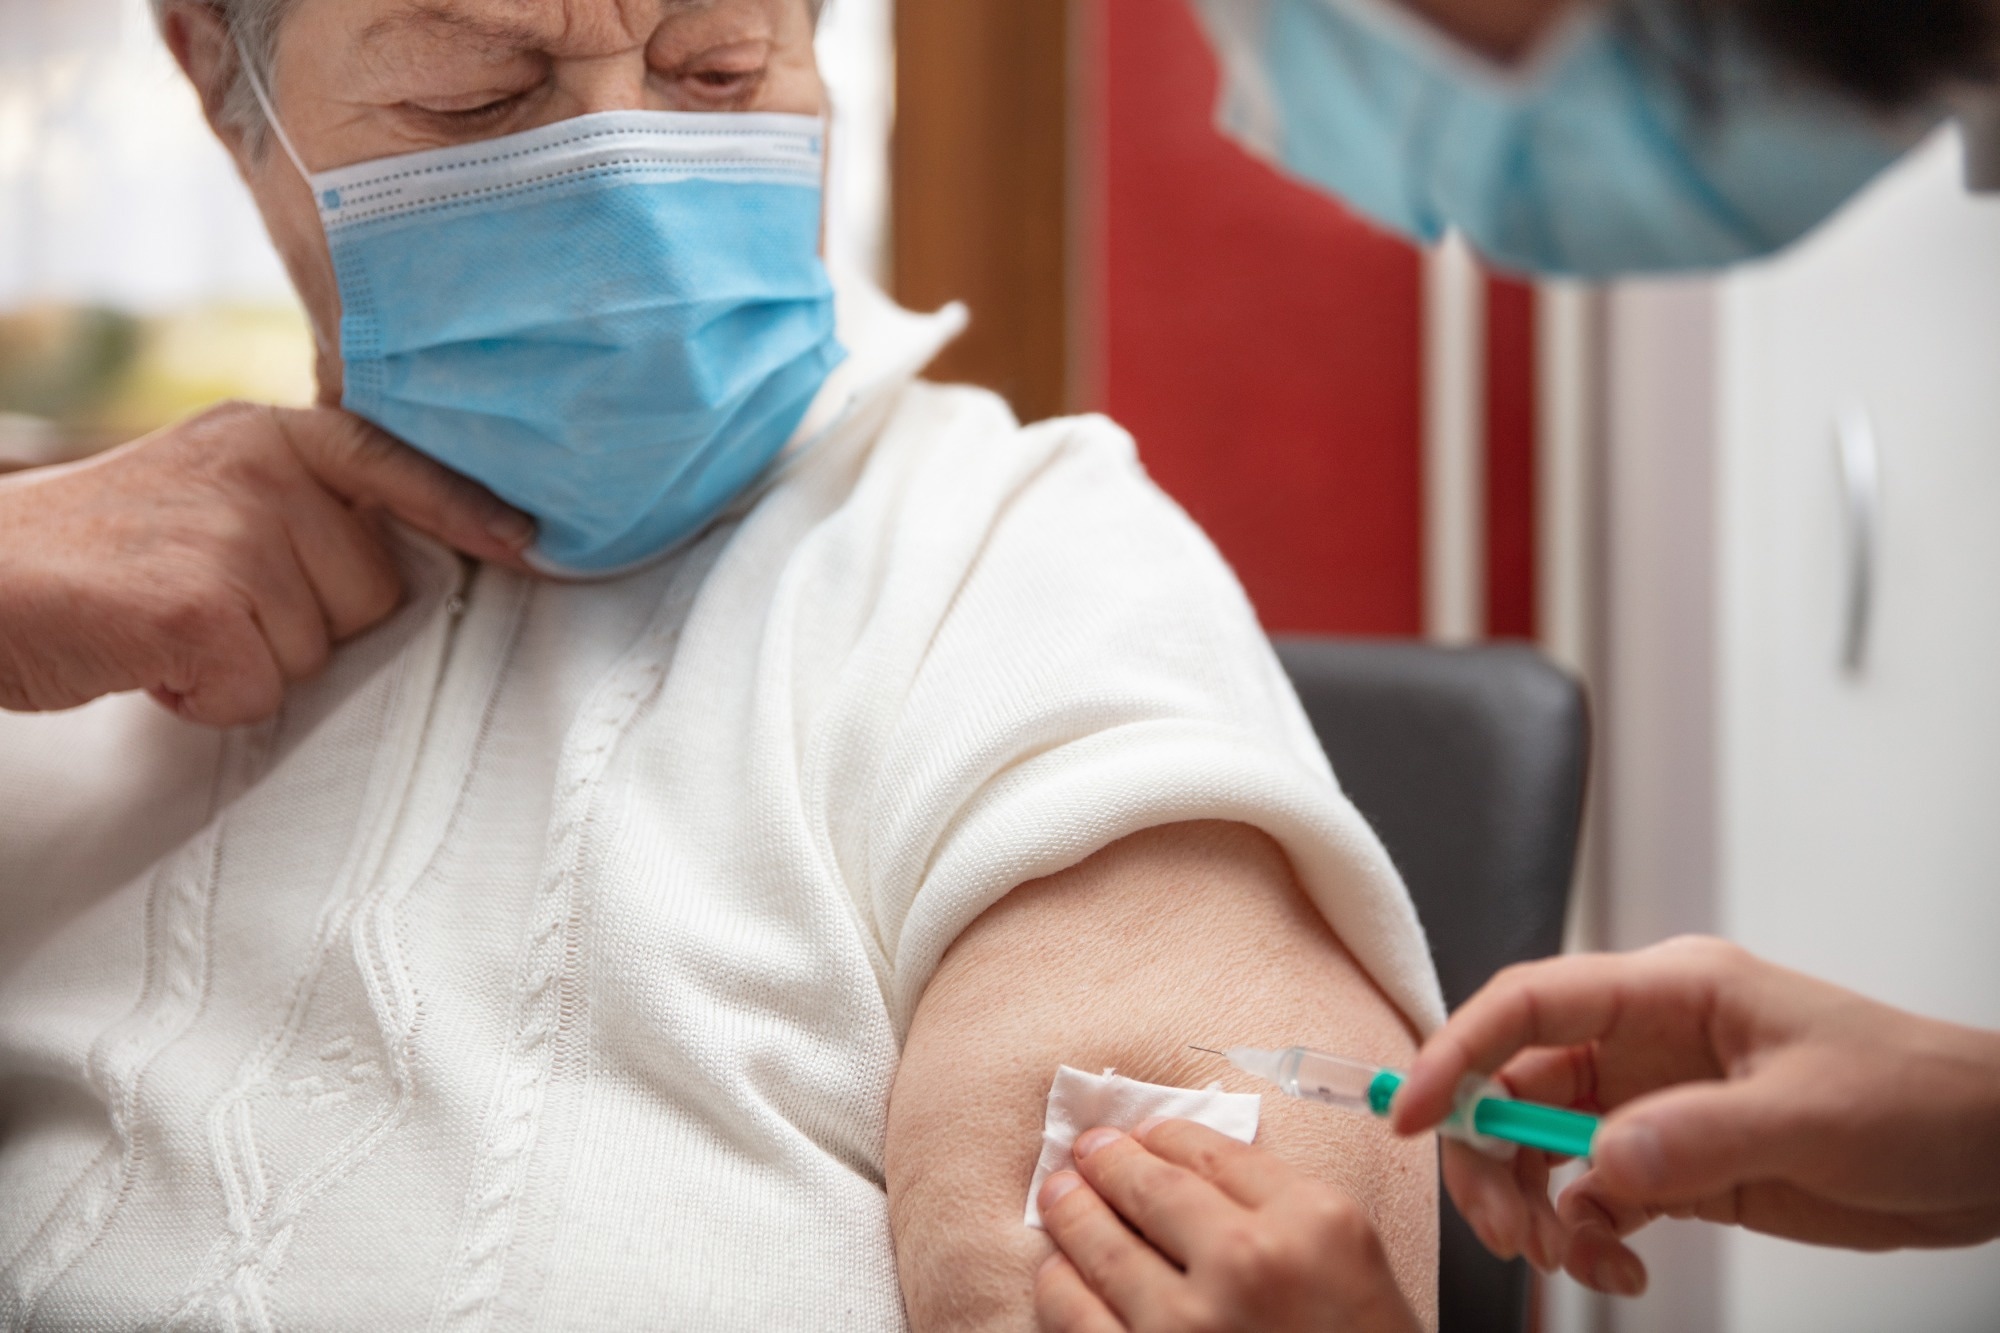 Study: ﻿﻿﻿﻿﻿﻿﻿﻿﻿﻿﻿﻿﻿﻿﻿Effectiveness of Up-to-Date COVID-19 Vaccination in Preventing SARS-CoV-2 Infection Among Nursing Home Residents — United States, November 20, 2022–January 8, 2023. Image Credit: MiriamDoerrMartinFrommherz/Shutterstock.com